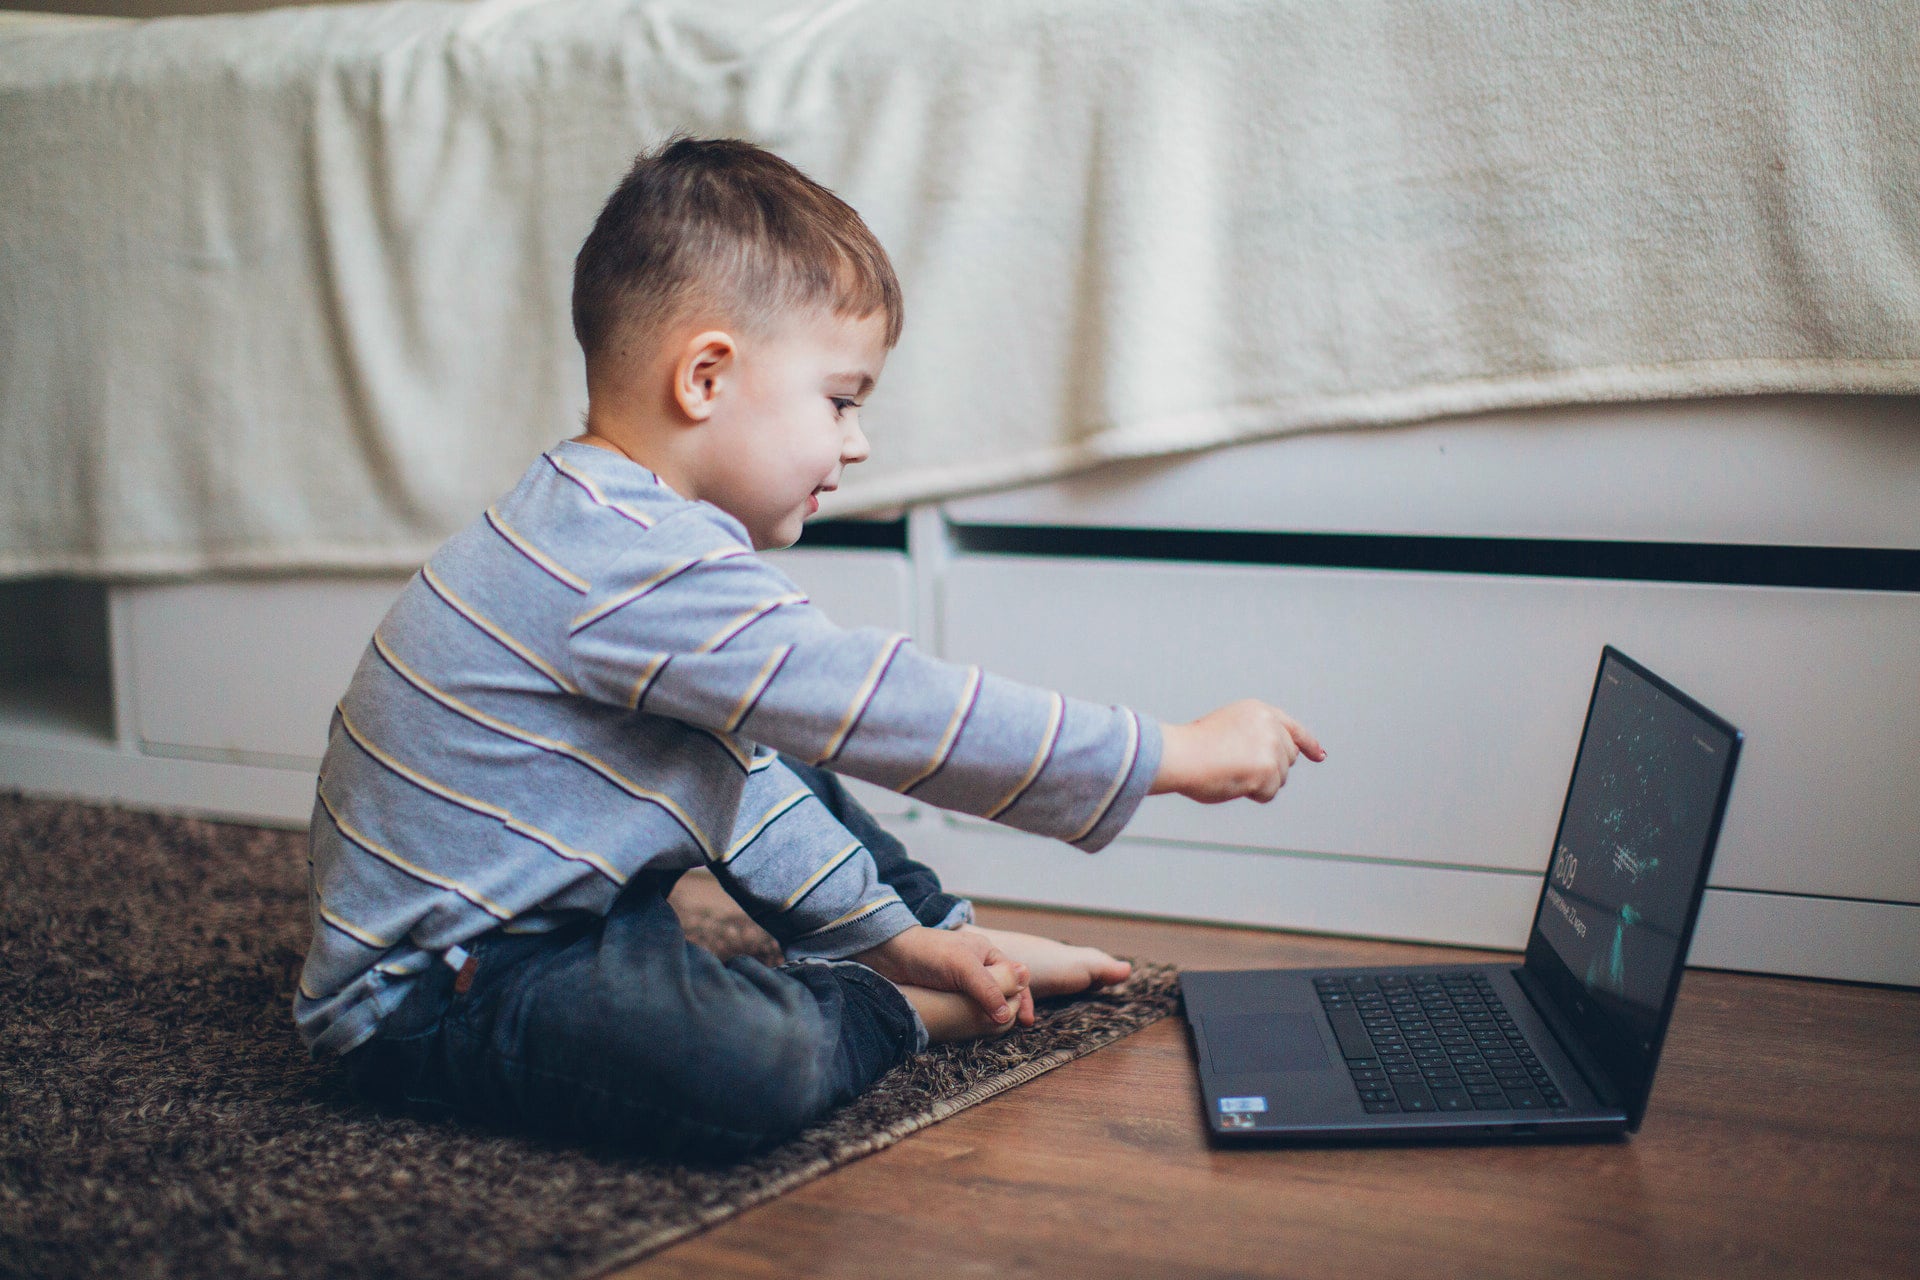 Young boy sitting on a rug pointing at a laptop screen.